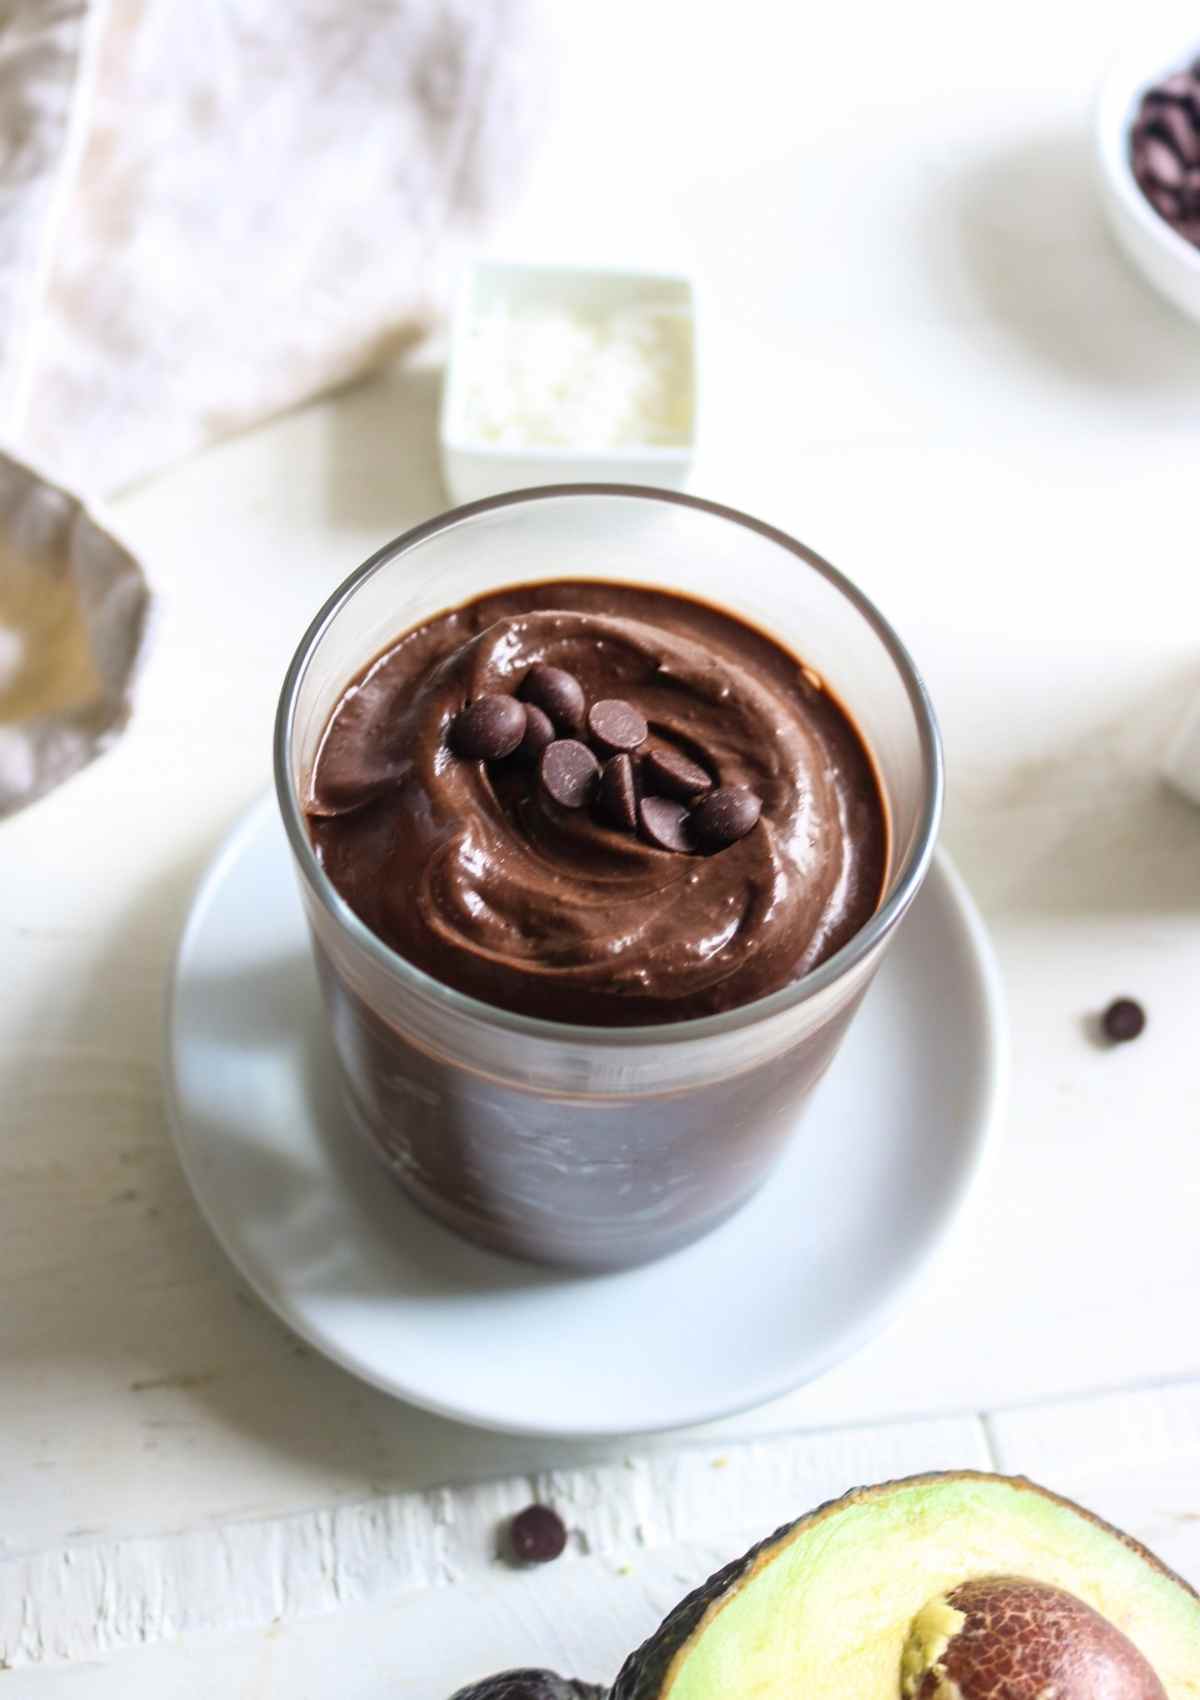 vegan chocolate mousse made with avocado served in a glass and chocolate chips on top